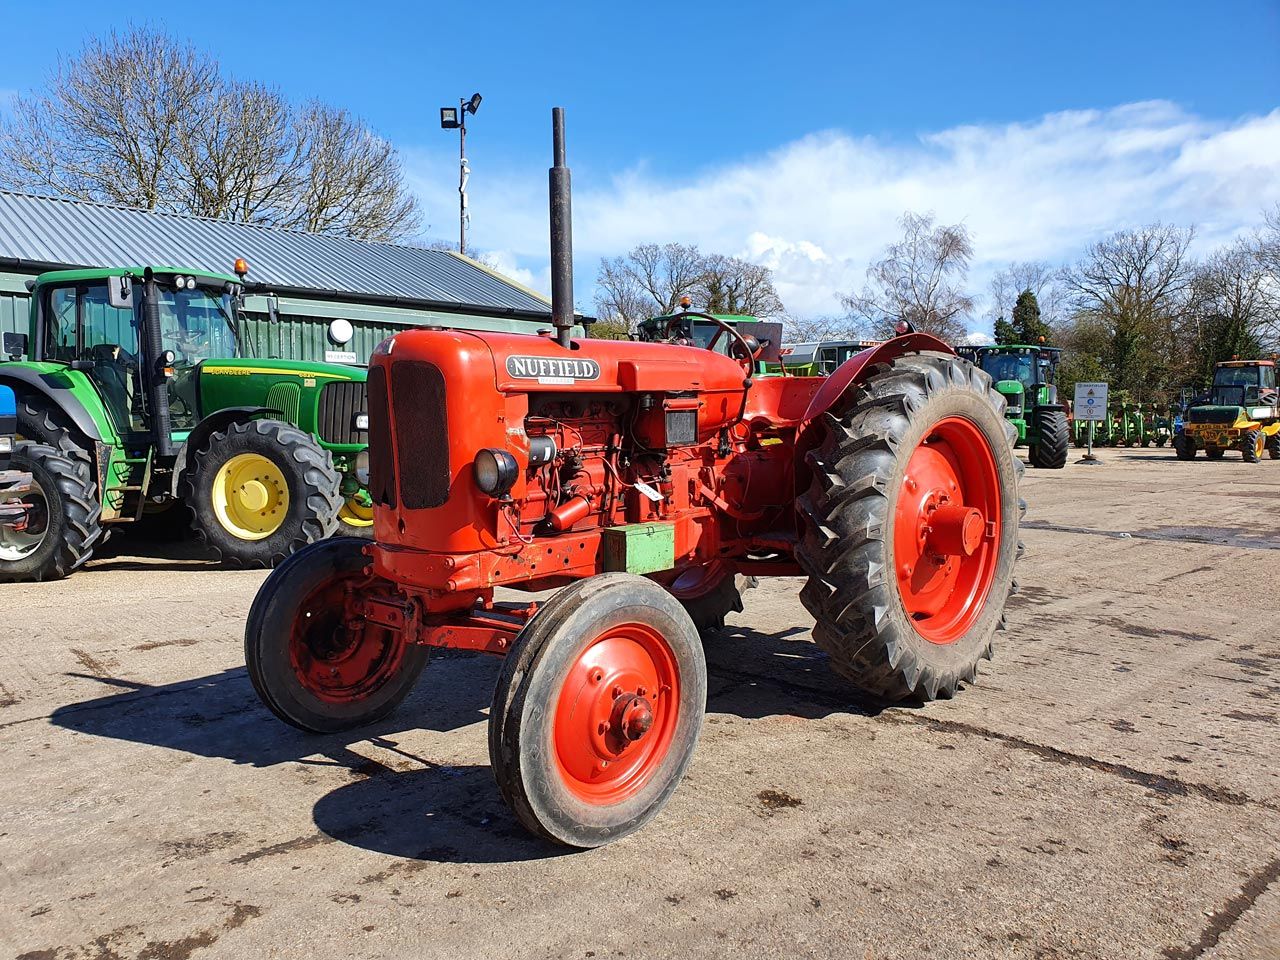 1955 Nuffield Universal DM4 2wd Tractor